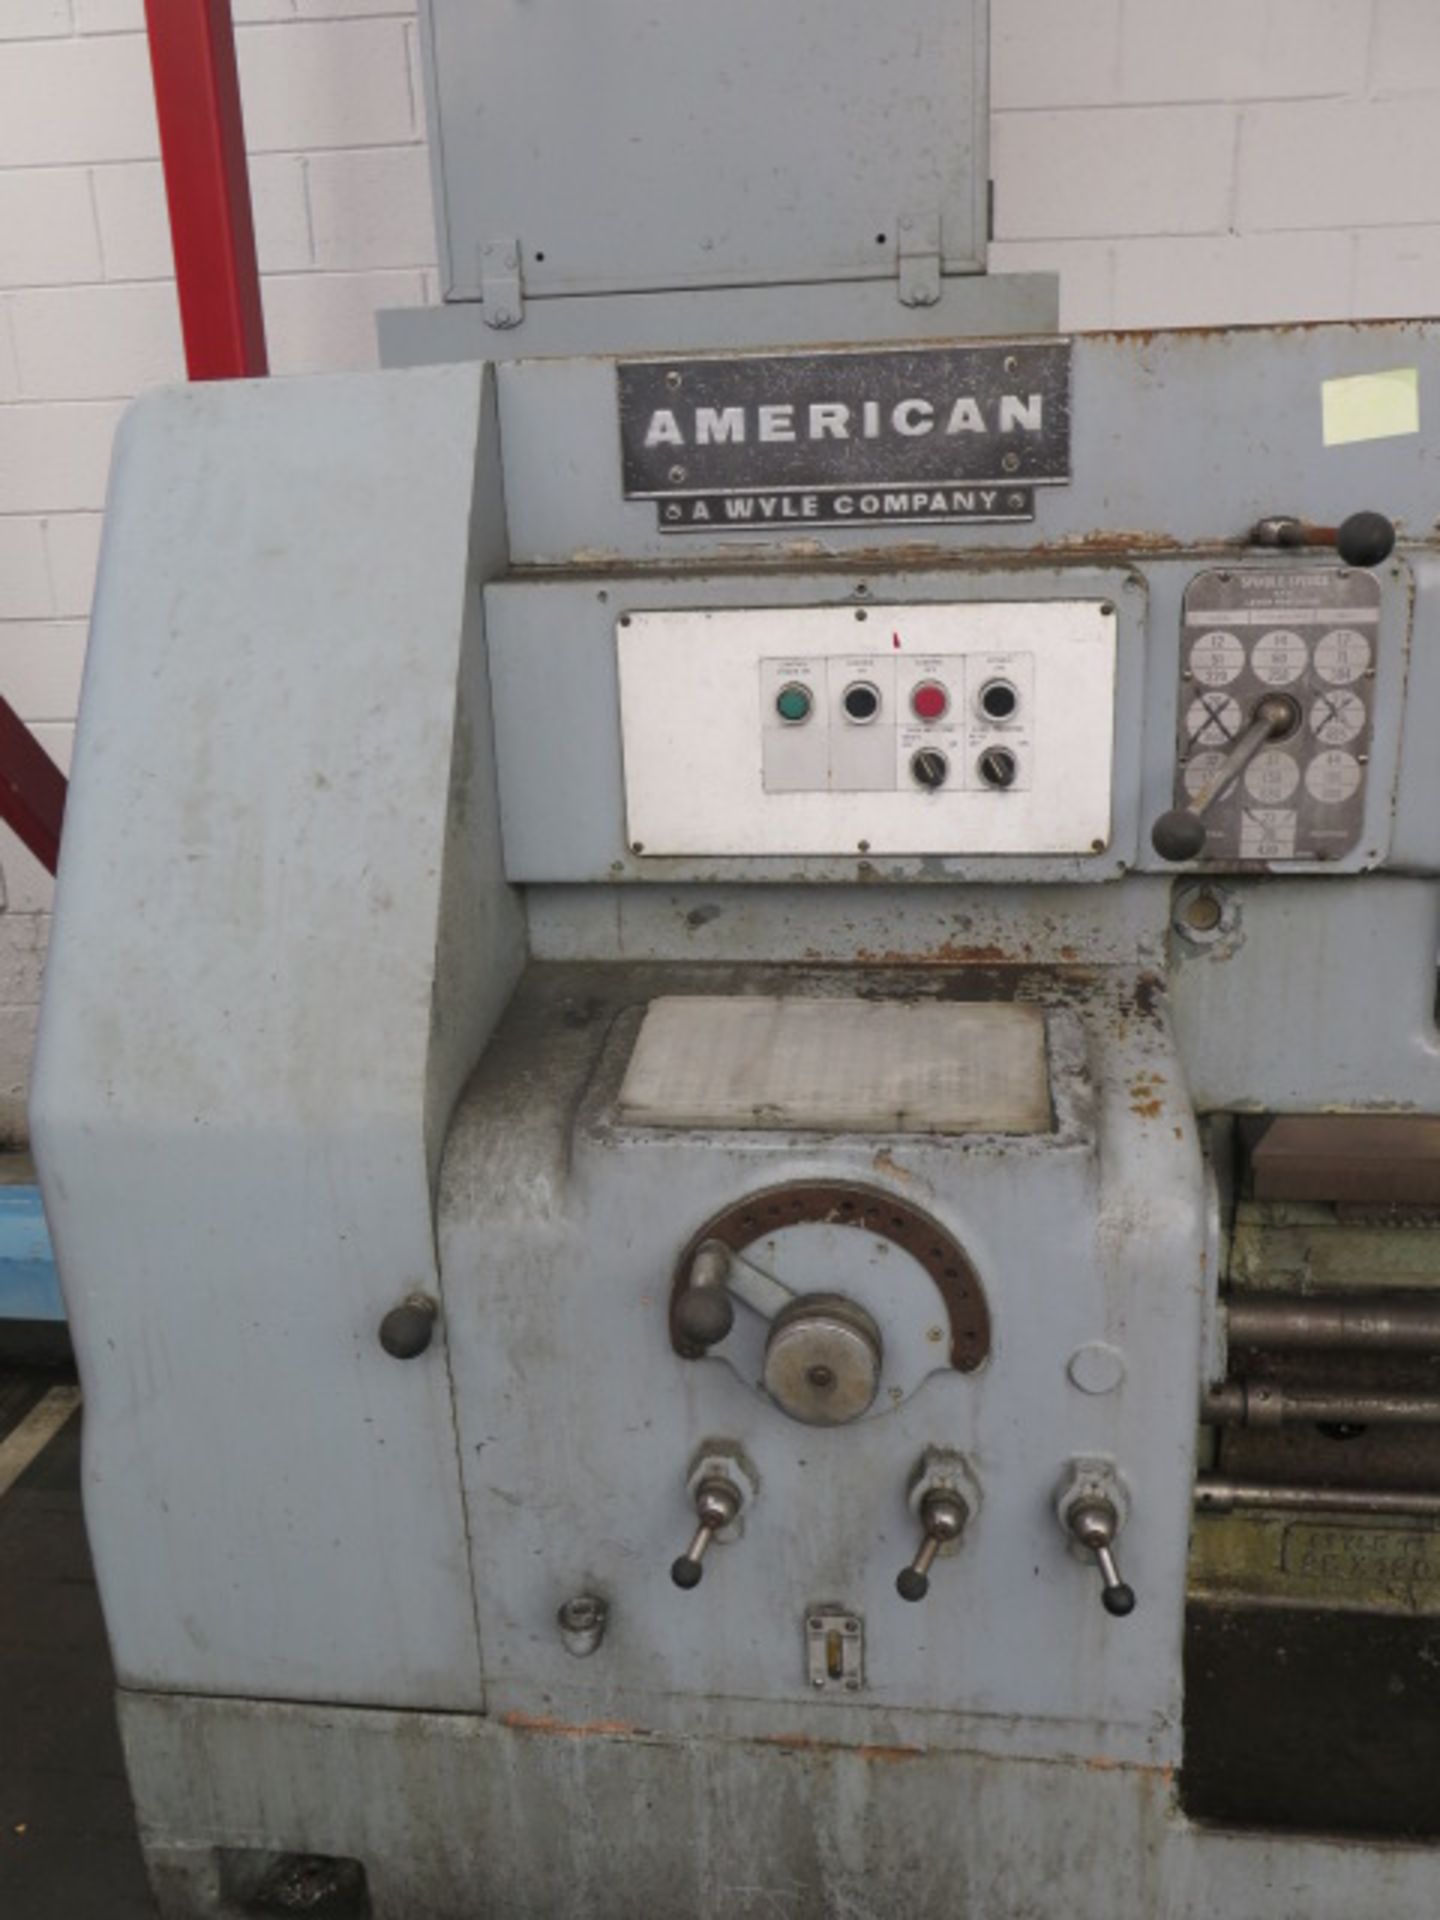 American 30" x 126" Geared Head Lathe s/n 78988 w/ 12-800 RPM, Inch Threading, Tailstock, Tool Post, - Image 4 of 10